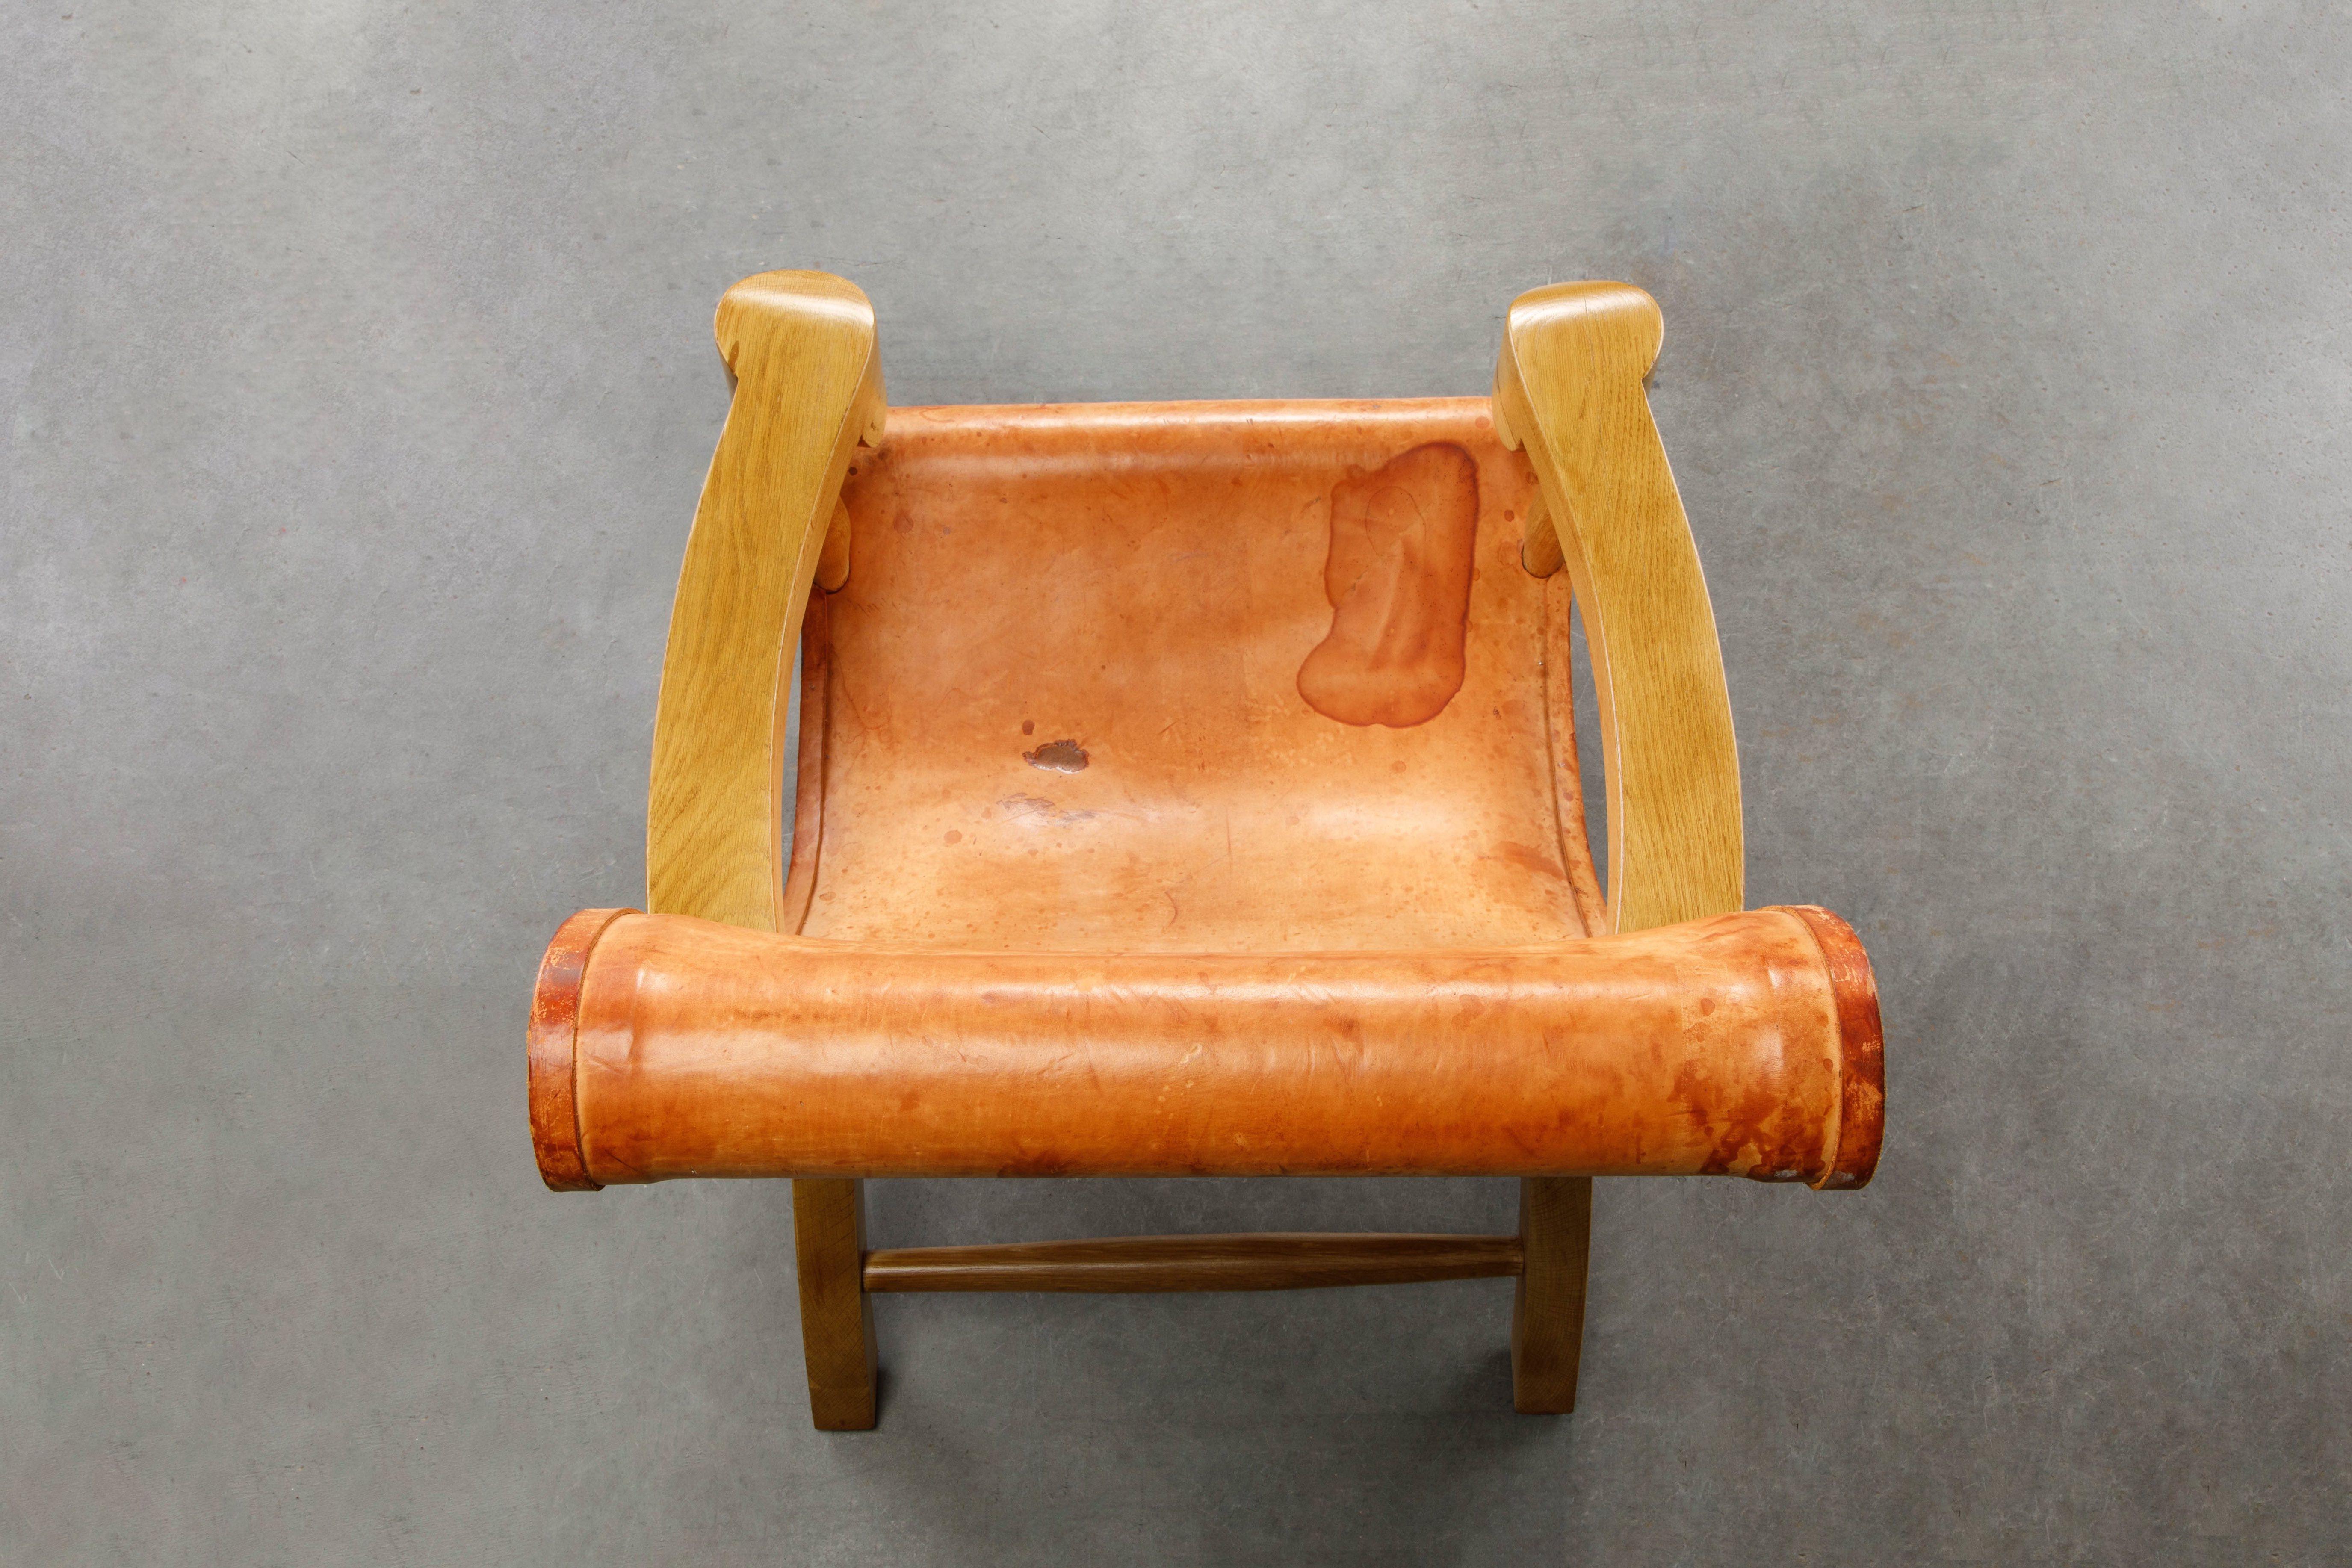 Clara Porset Patinated Leather and Cypress 'Butaque' Armchair, Mexico, c. 1947  9